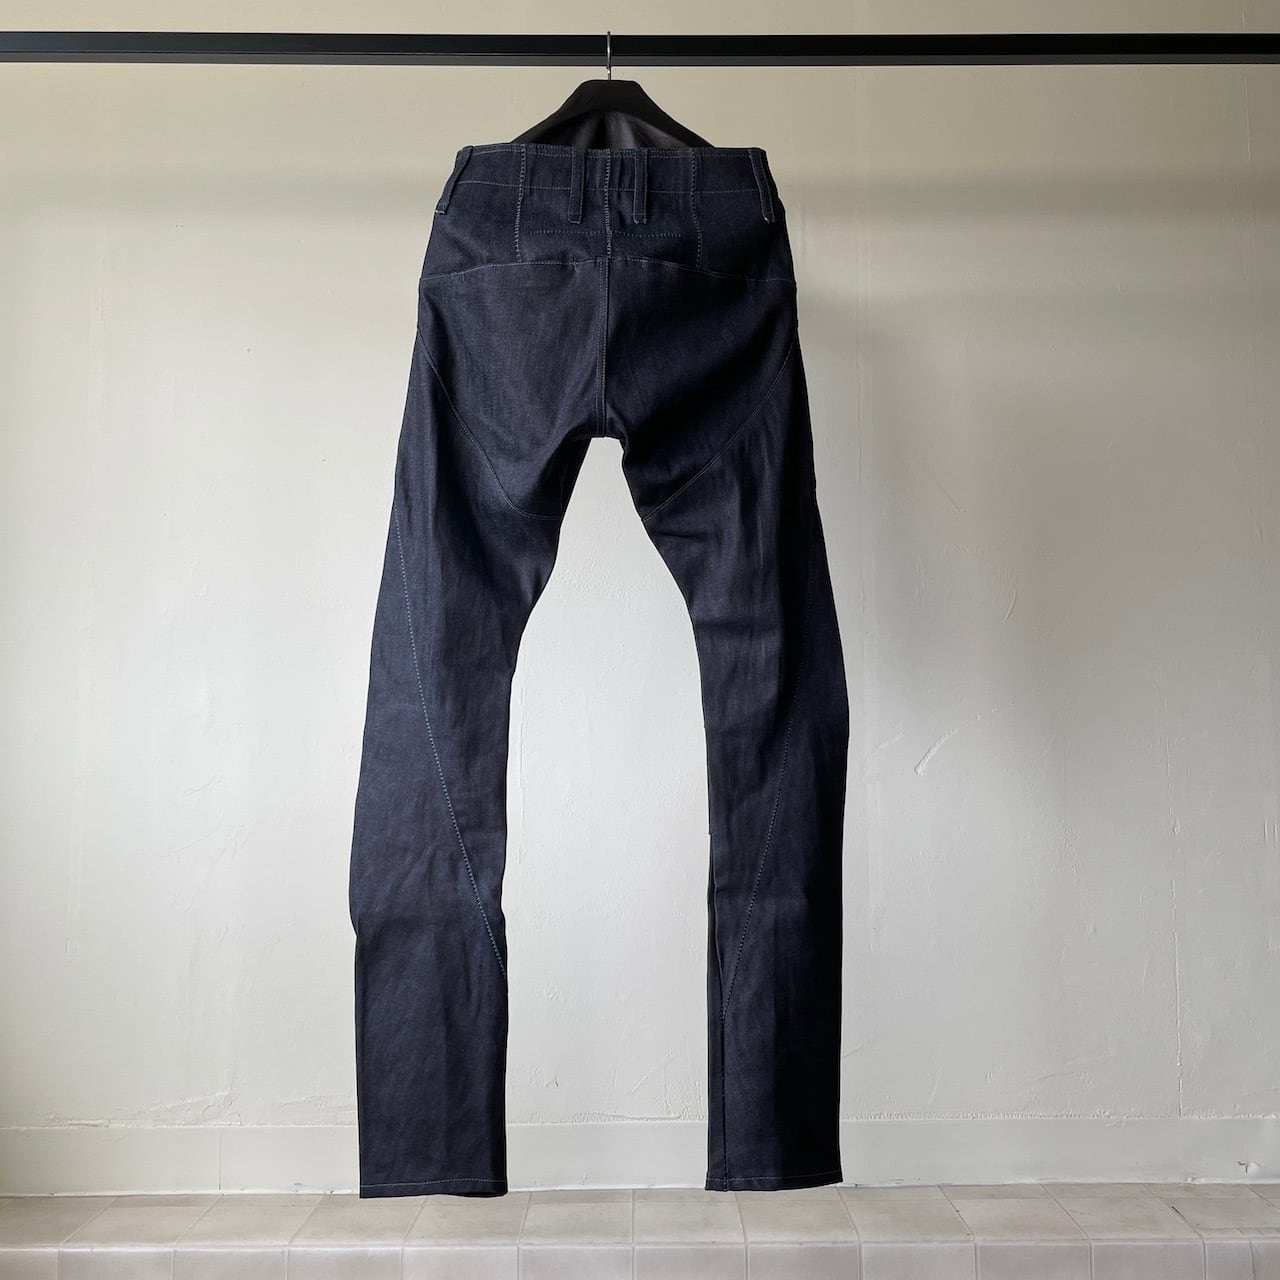 thee old circus 0199 rot-9 denim pants IND